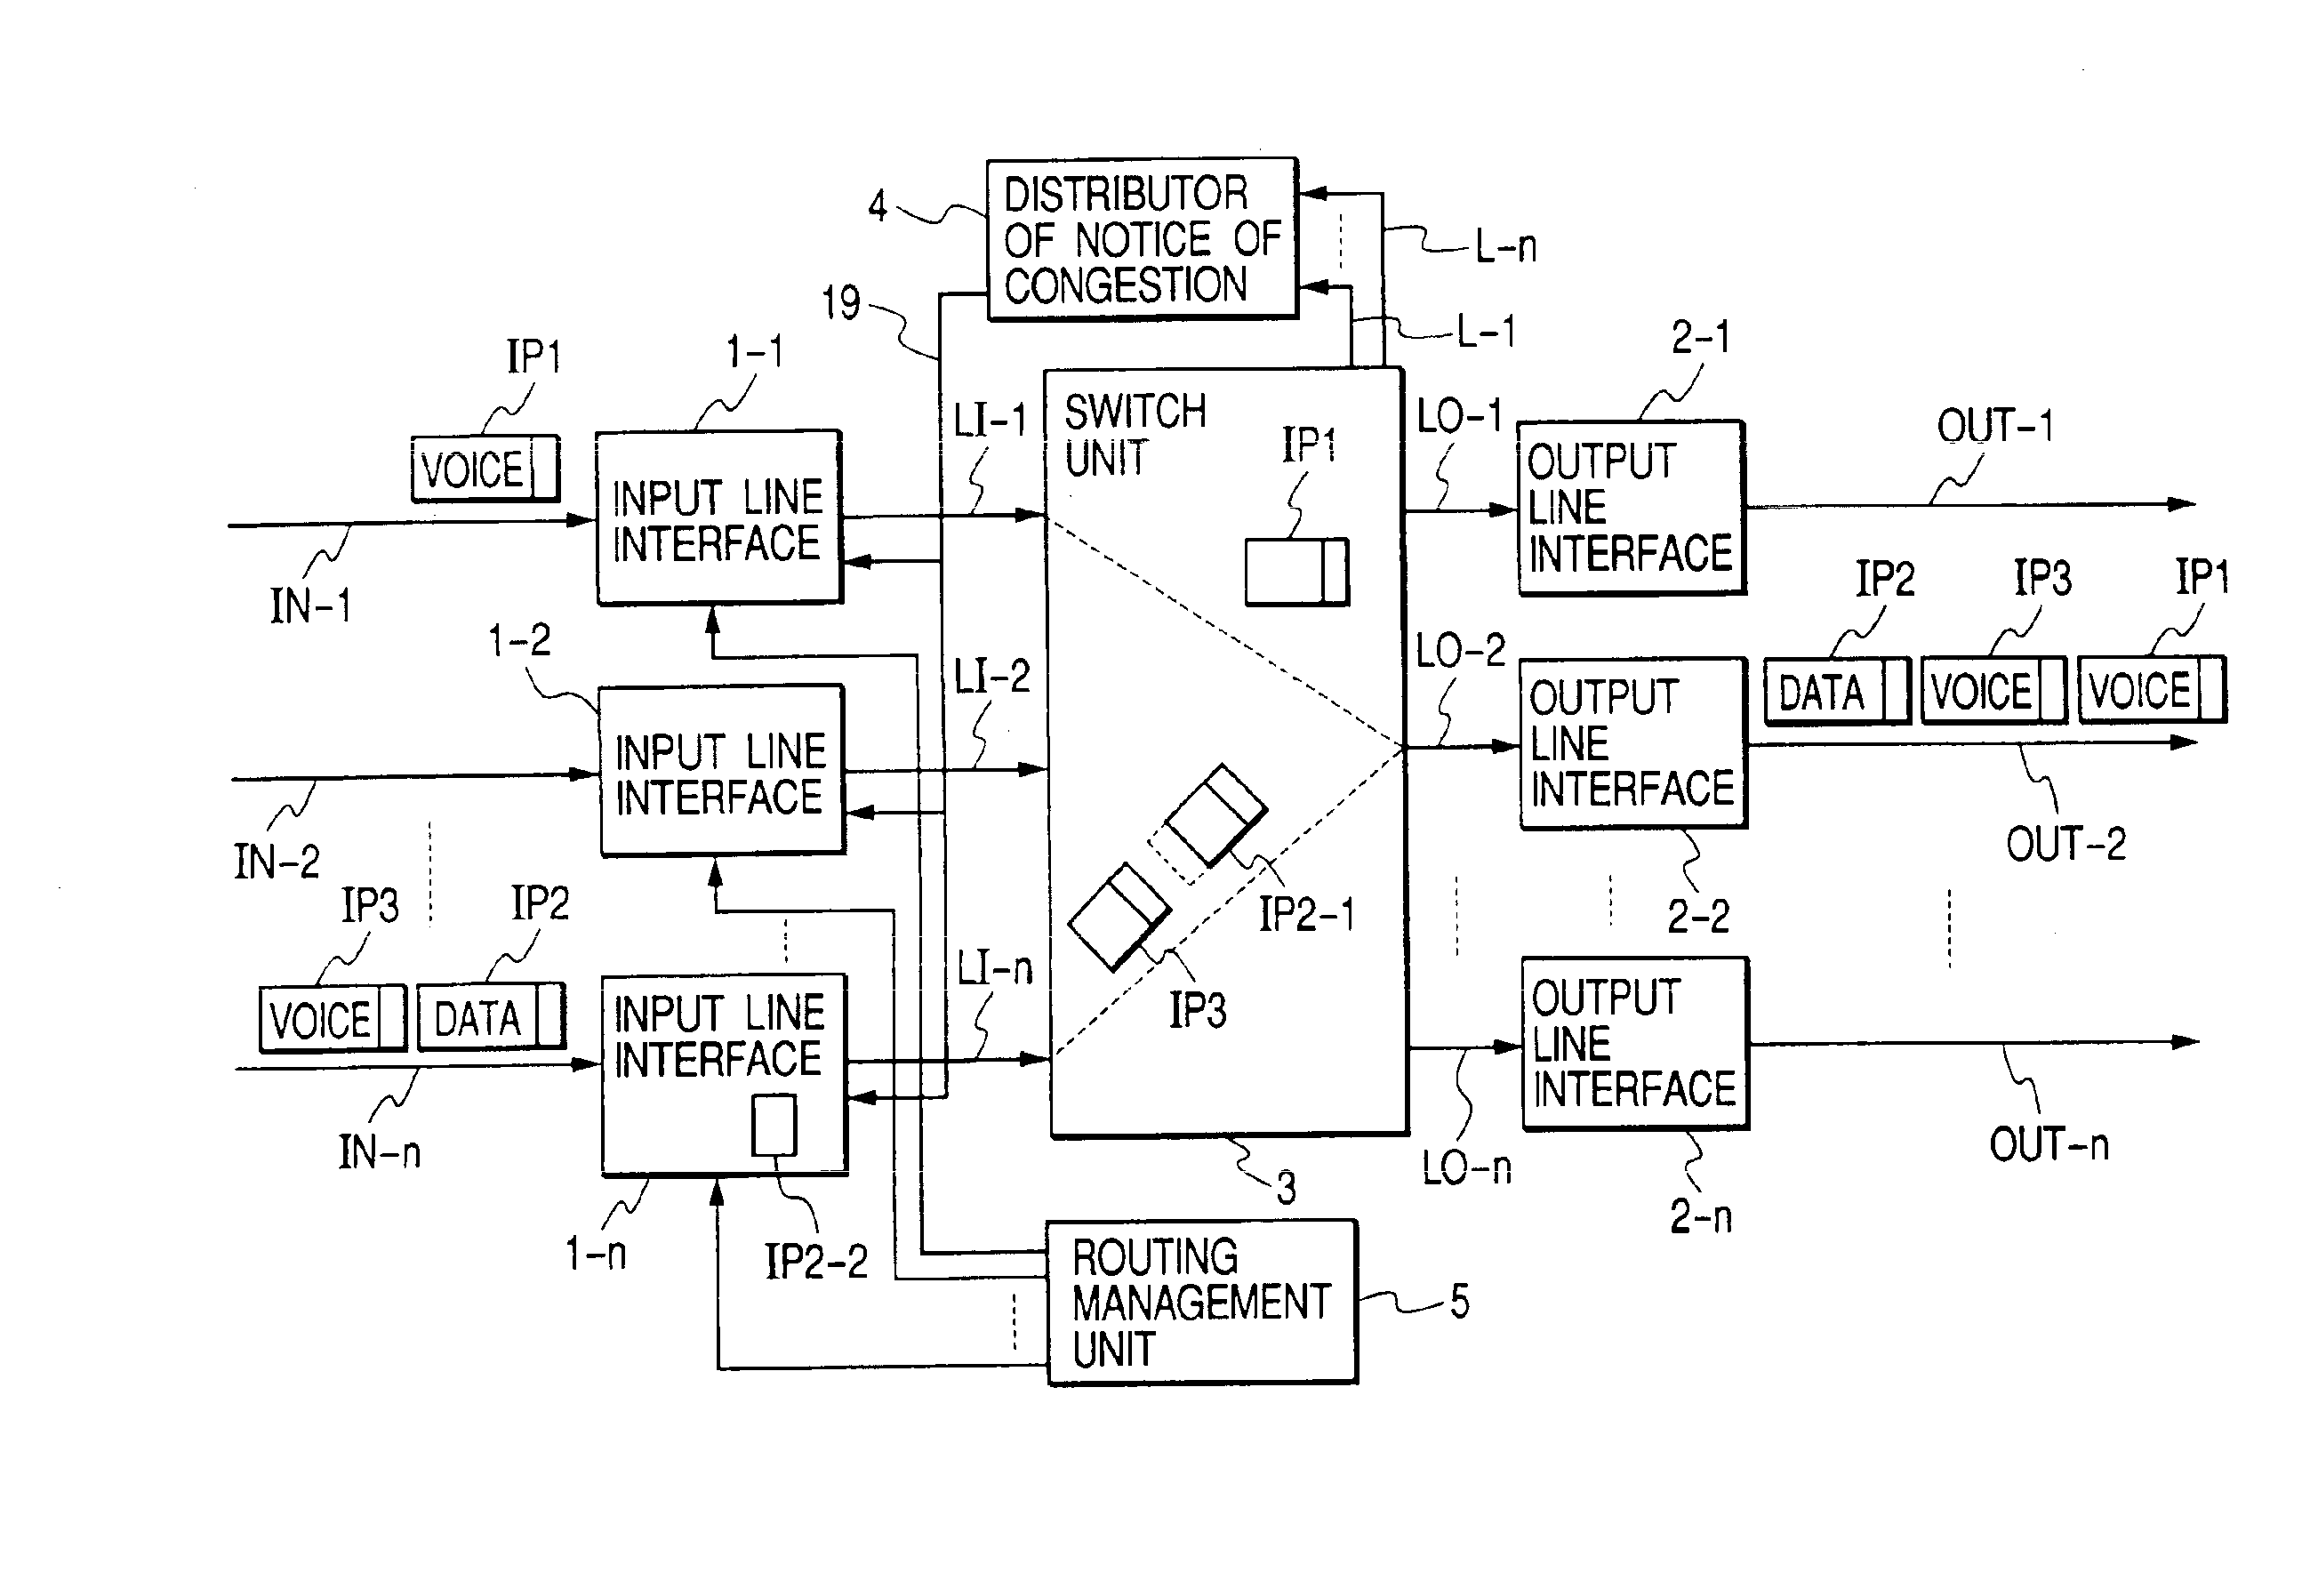 Packet switch for switching variable length packets in the form of ATM cells